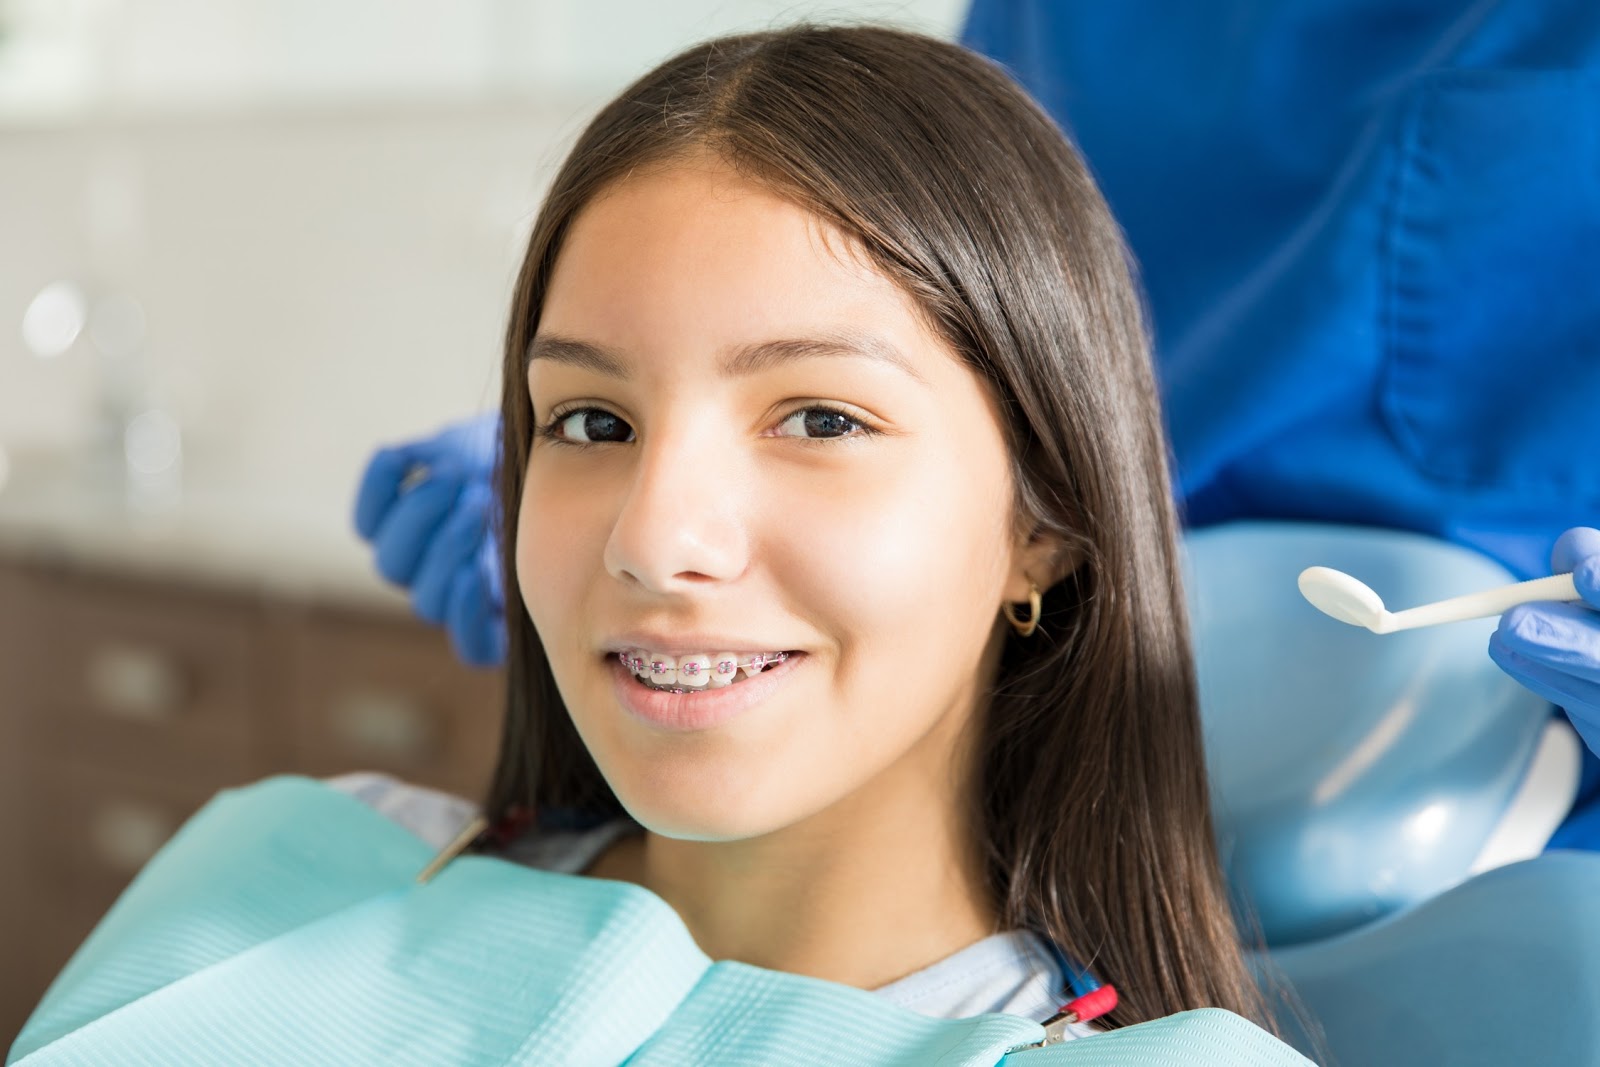 Girl at dentist with braces